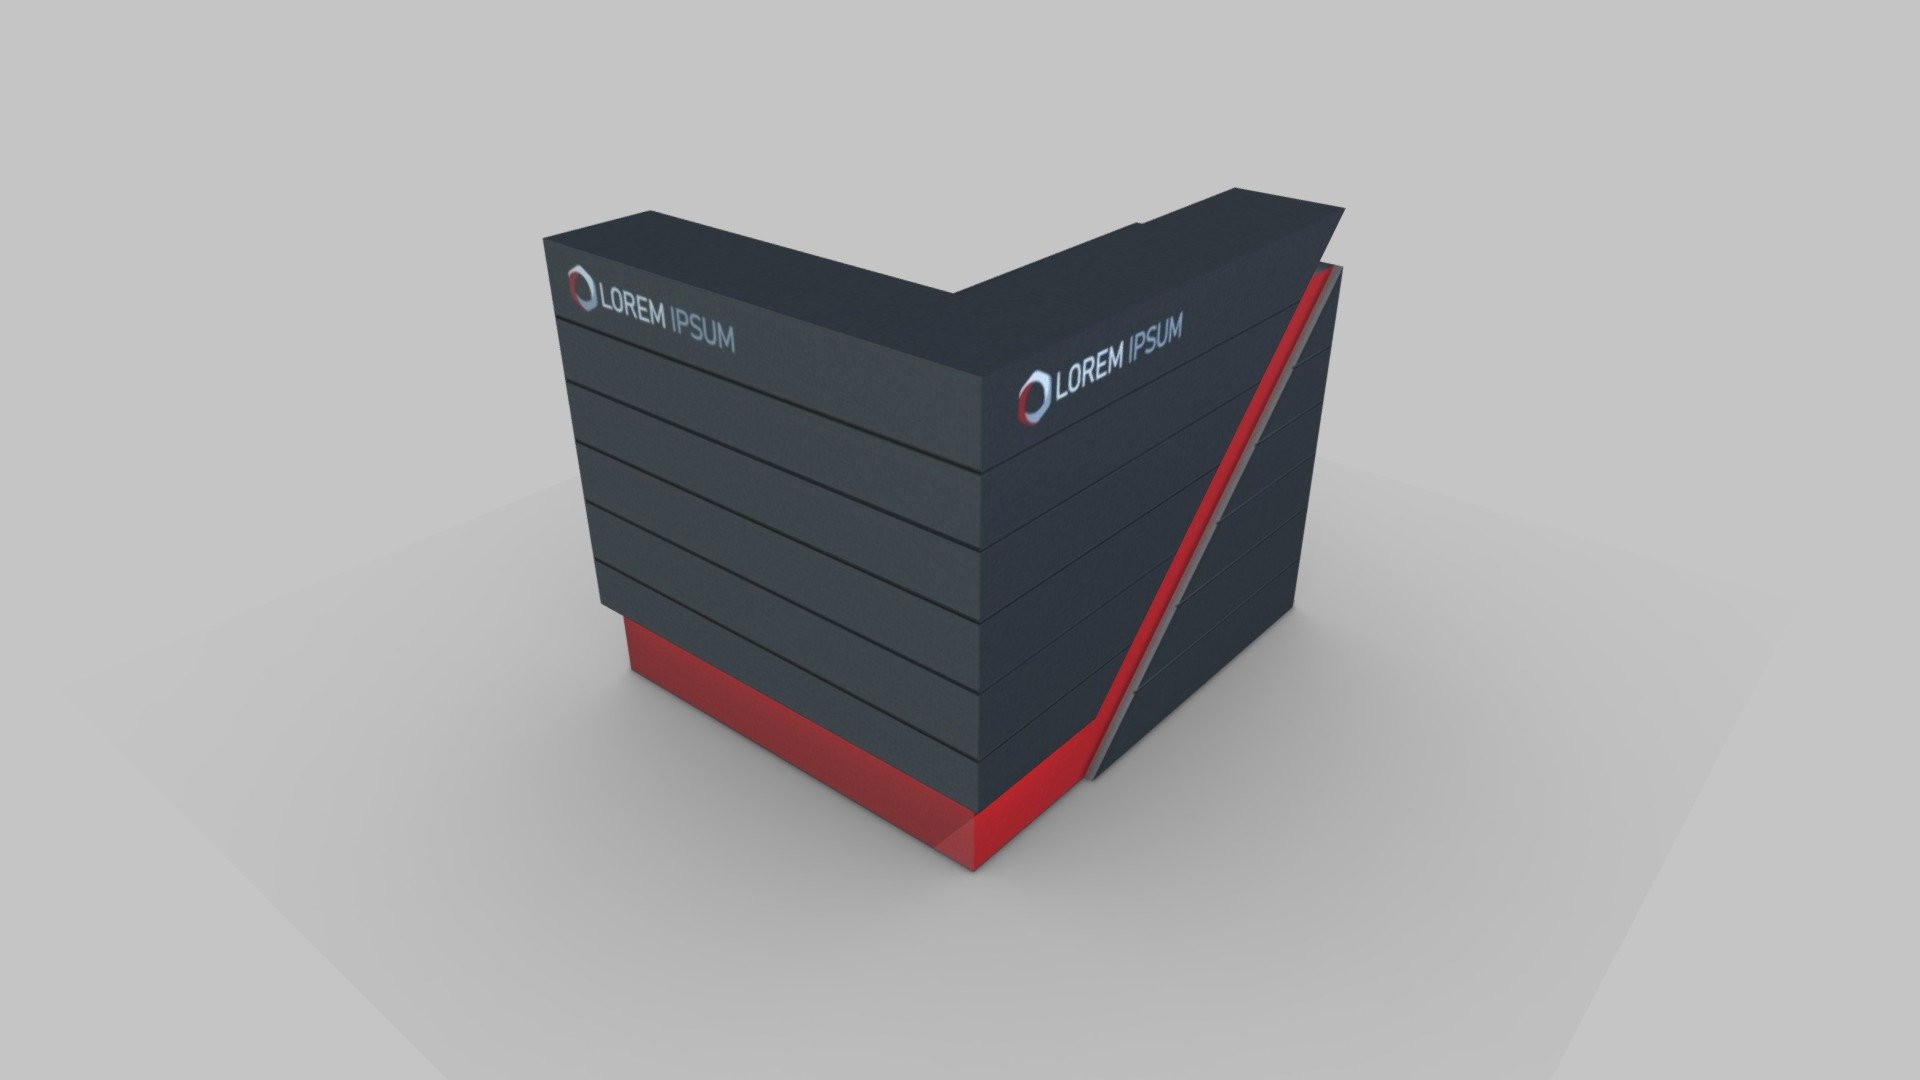 this model has set in autodesk 3Ds max 2018 _ V-ray Adv 3.60.03

Information counter Desk

Dimention - 125x105x100cm

Unit setup - 1.0 - centimeters - INFO Counter 003 - Buy Royalty Free 3D model by fasih.lisan 3d model